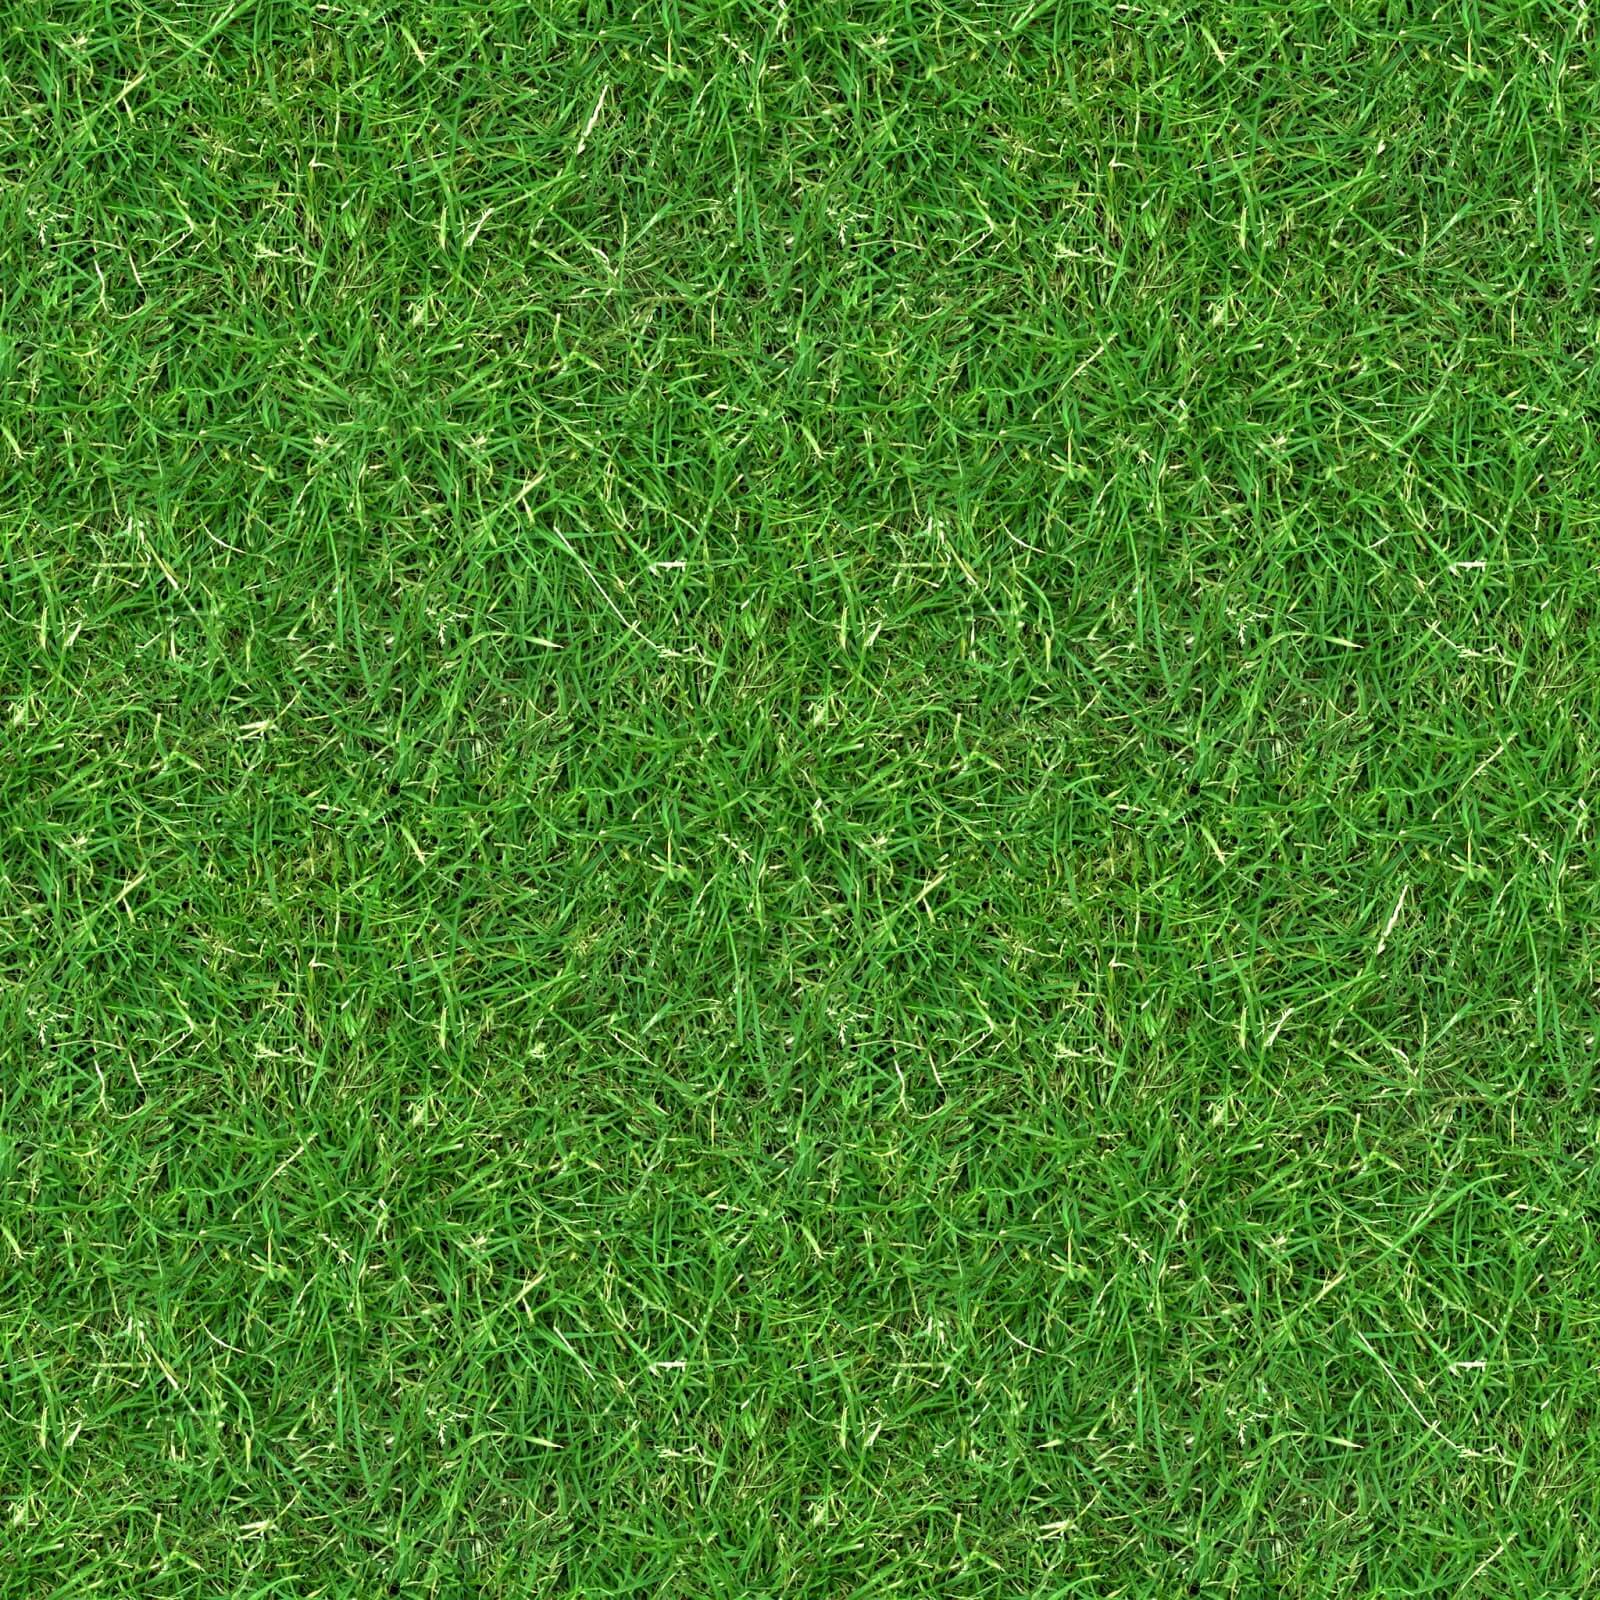 unity grass texture download